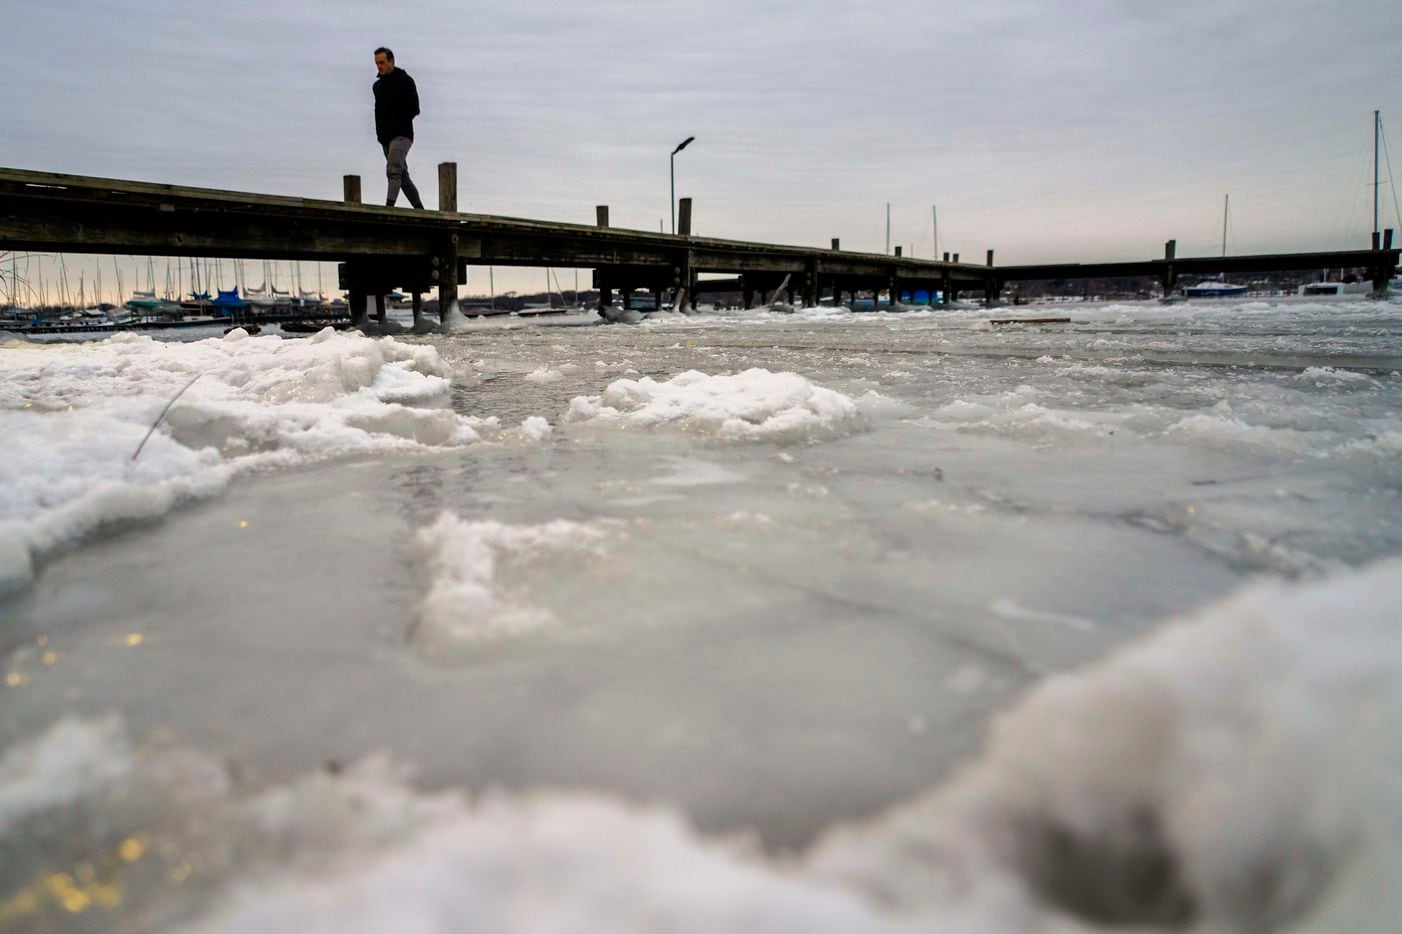 Frozen waters of White Rock Lake surround a pier after a winter storm brought snow and freezing temperatures to North Texas on Tuesday, Feb. 16, 2021, in Dallas. Another winter storm could dump 5 more inches of snow on Dallas-Fort Worth. (Smiley N. Pool/The Dallas Morning News)